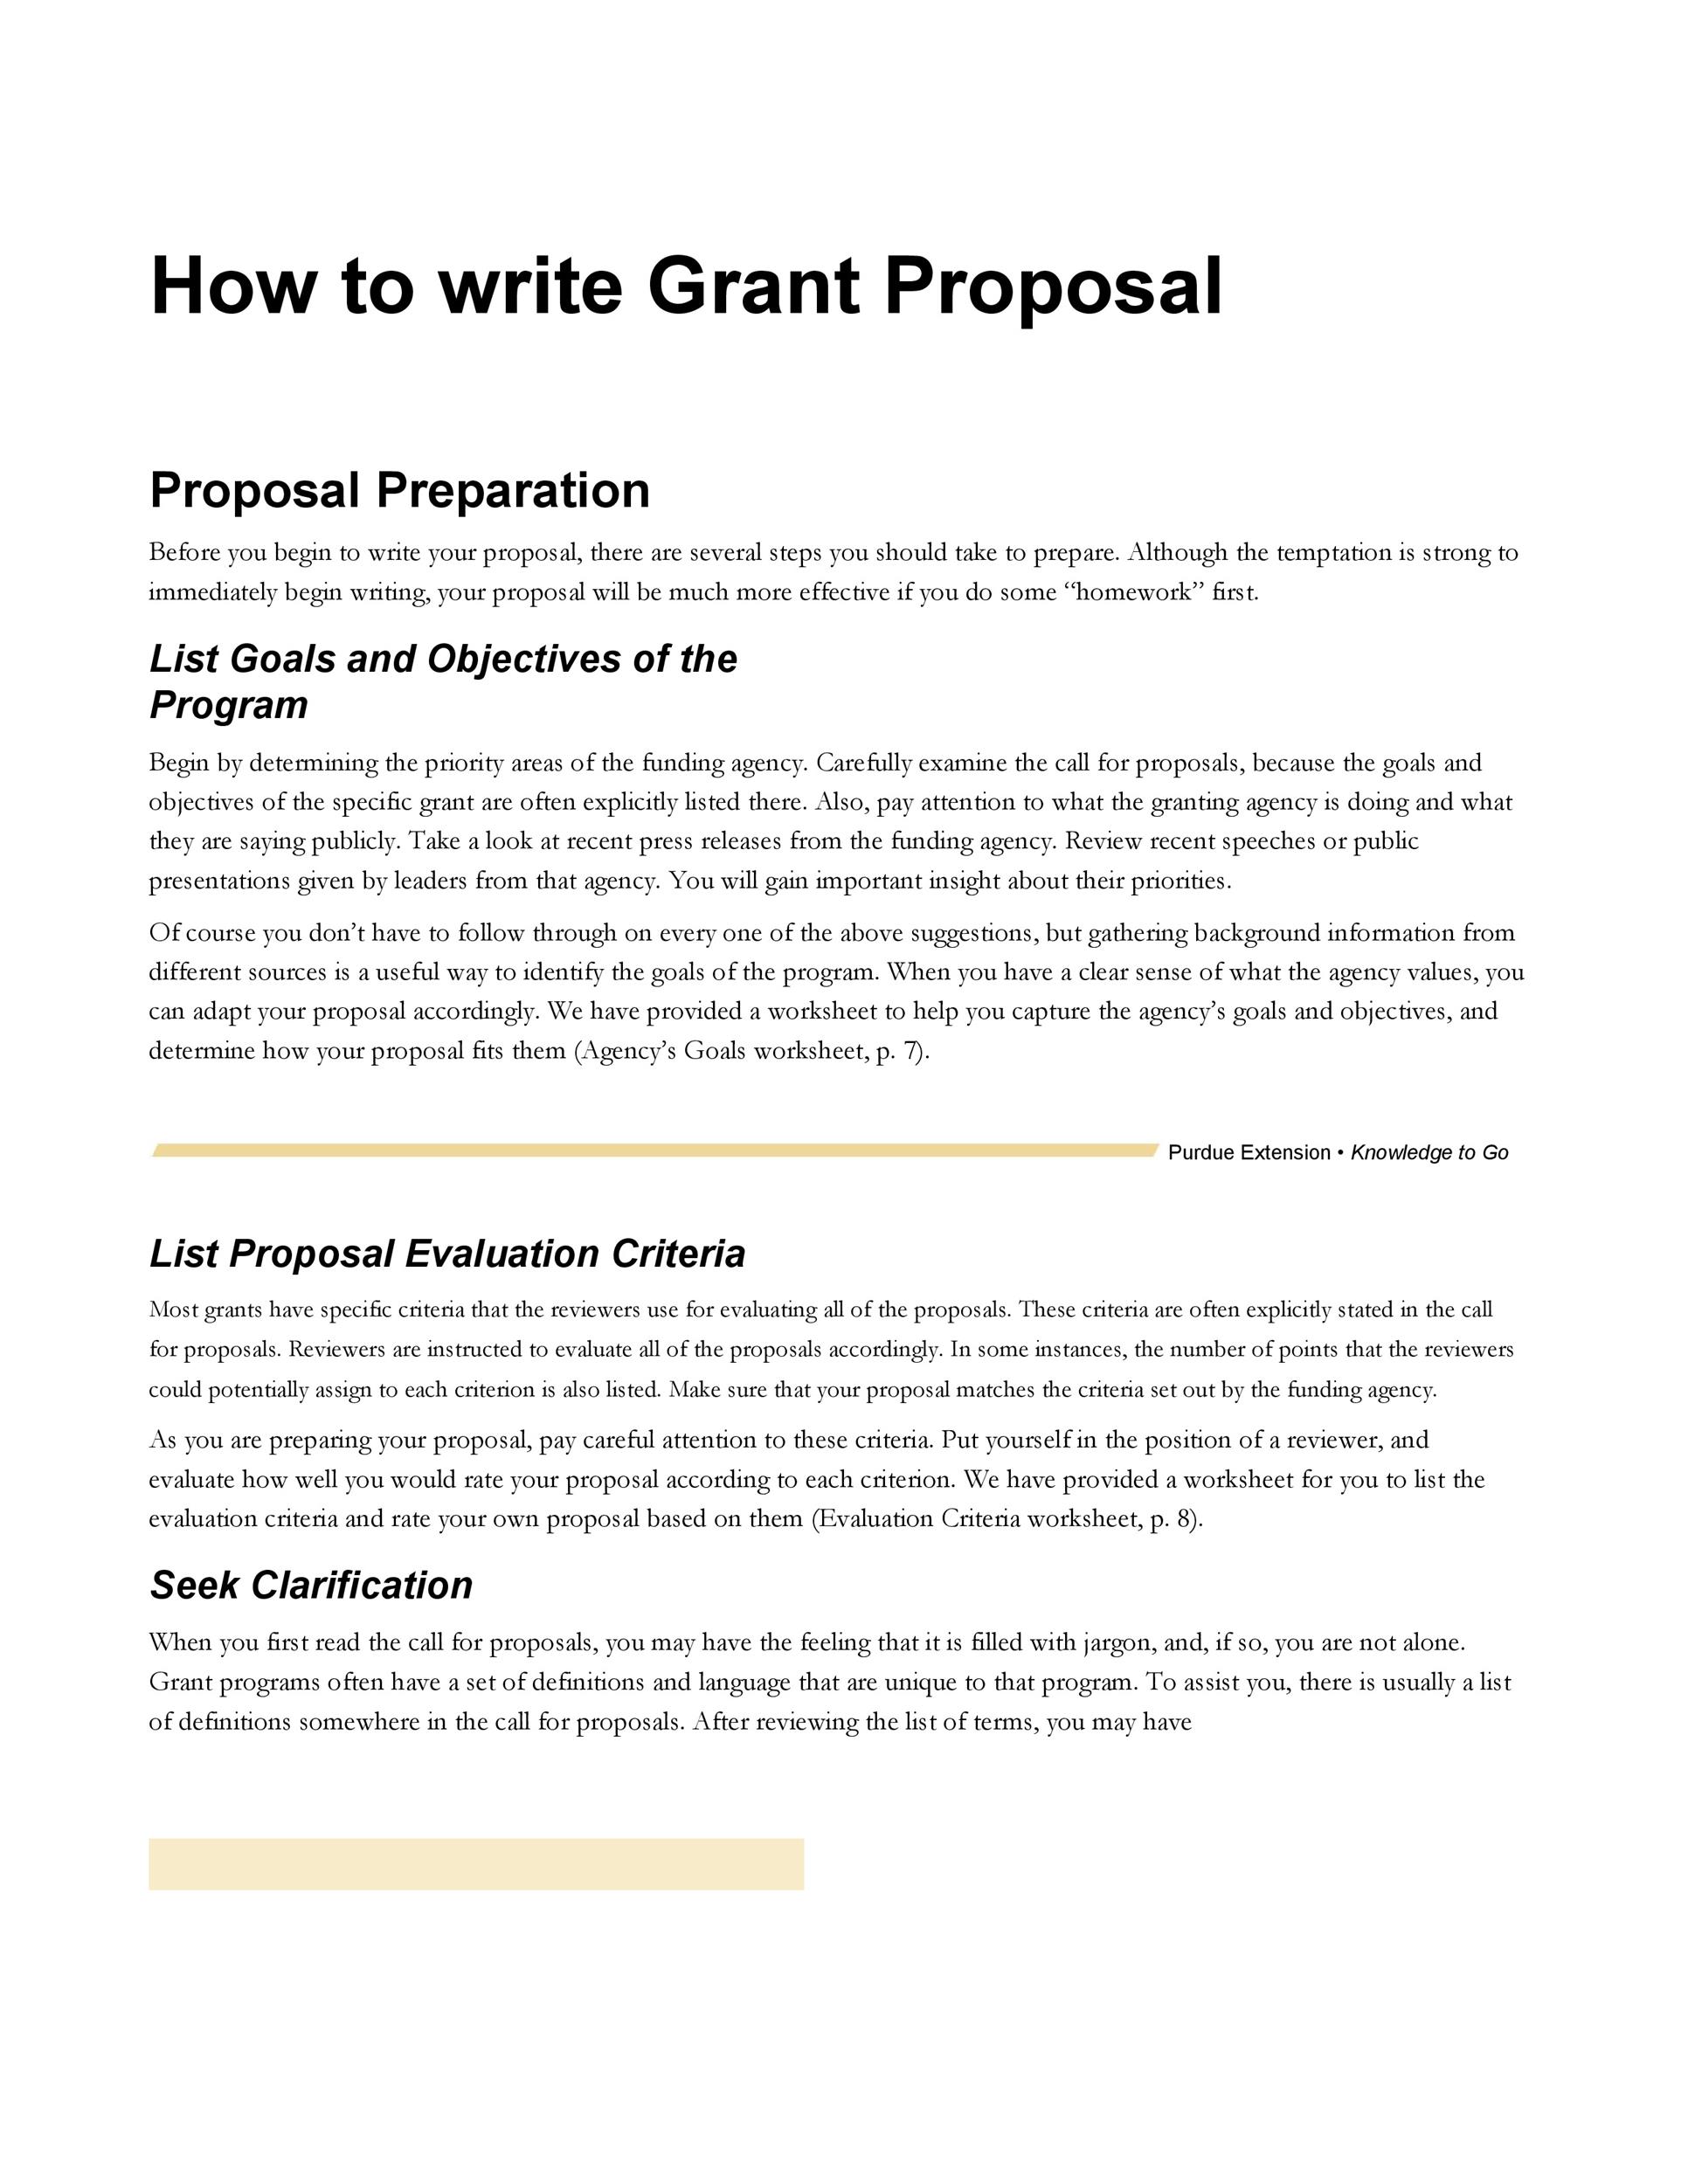 40+ Grant Proposal Templates [NSF, NonProfit, Research] Template Lab